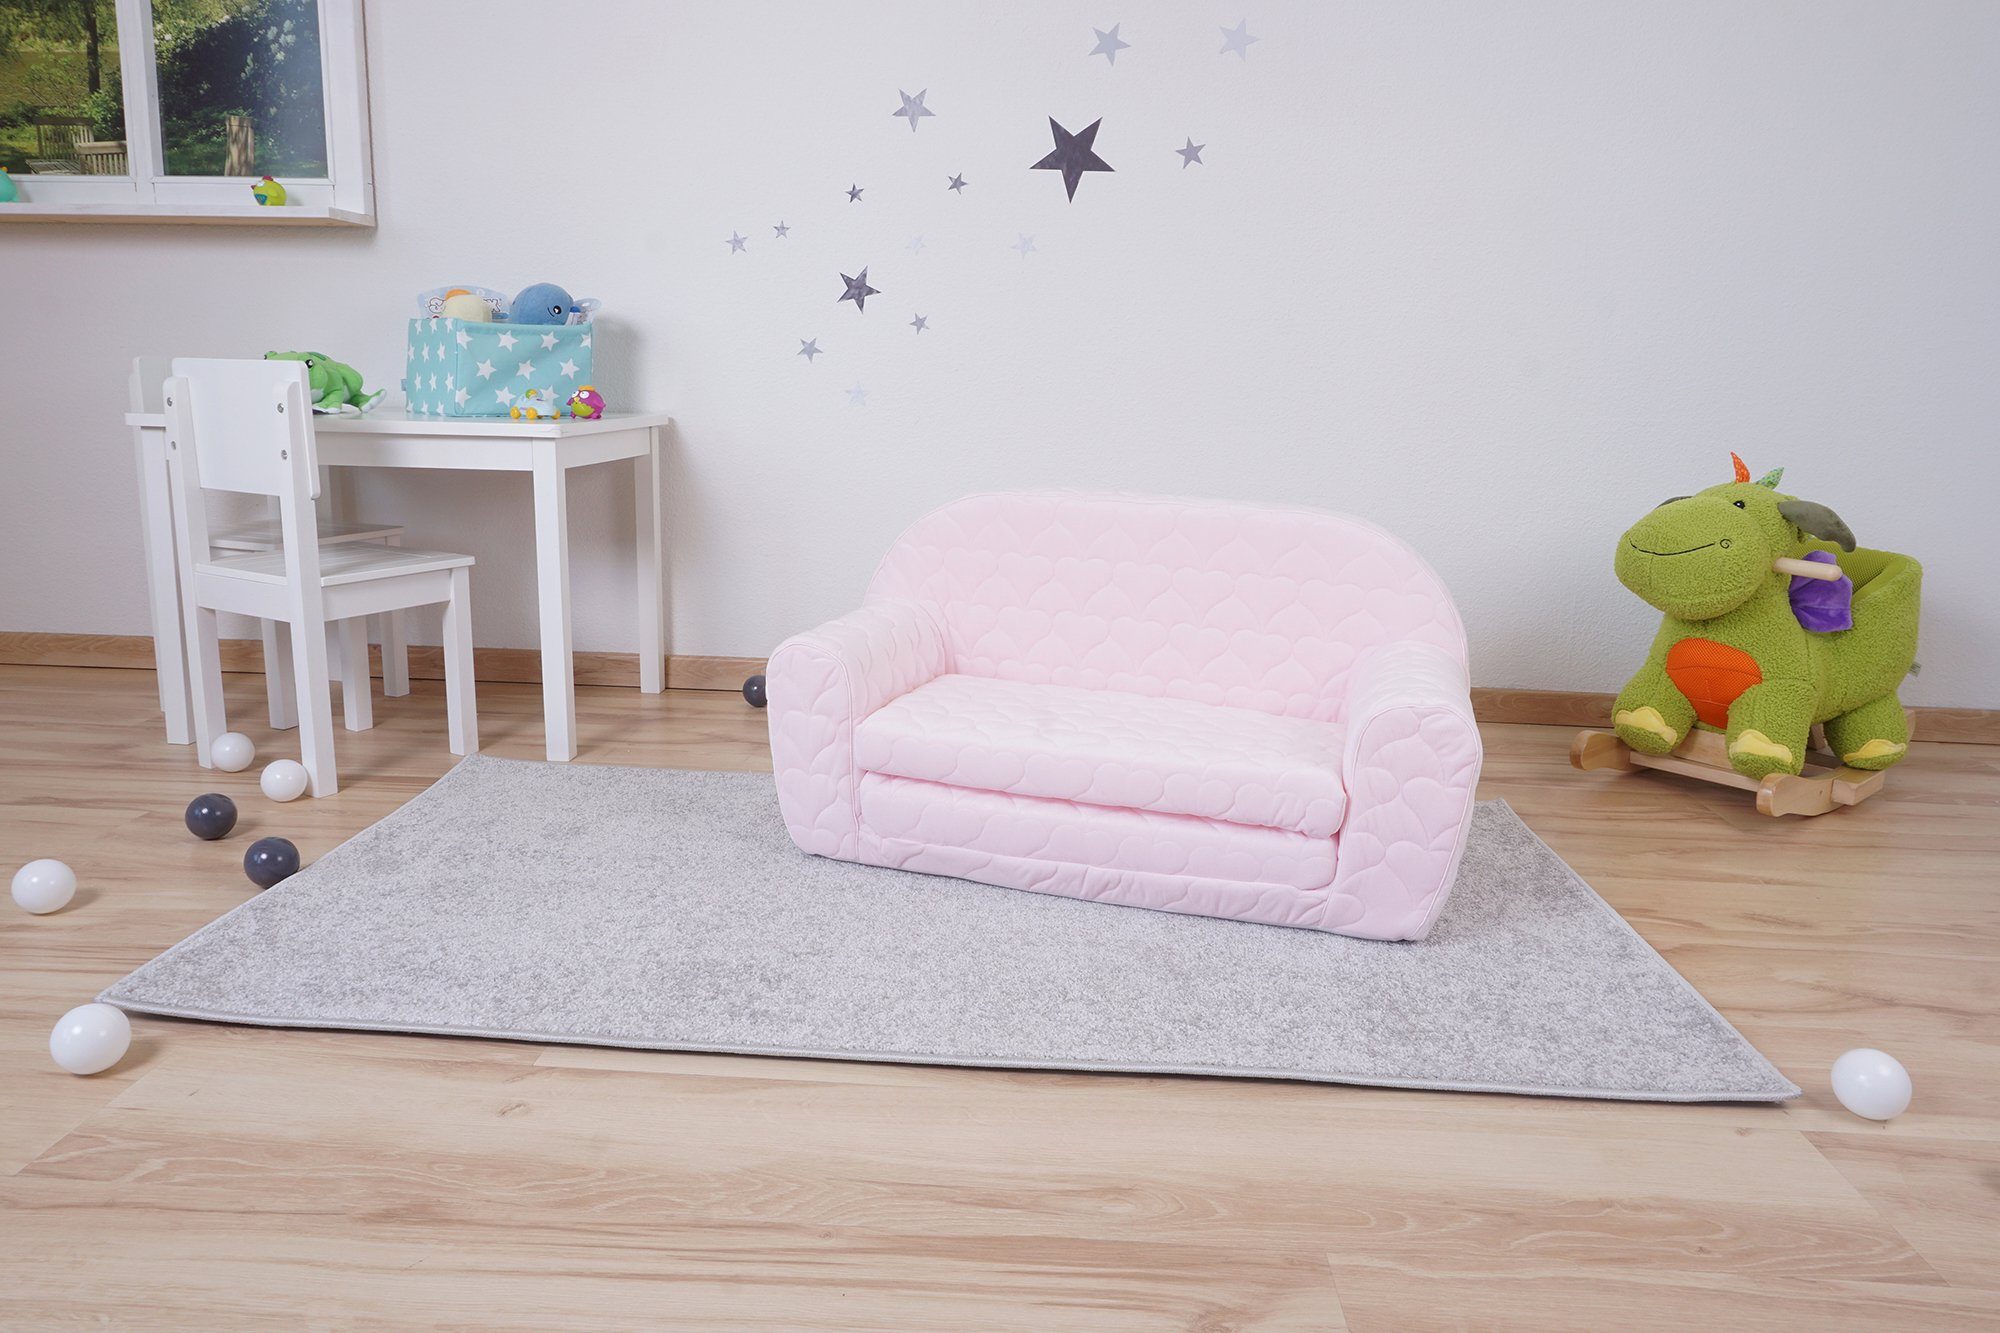 Knorrtoys® Sofa Cosy, Heart Made in Rose, für Europe Kinder